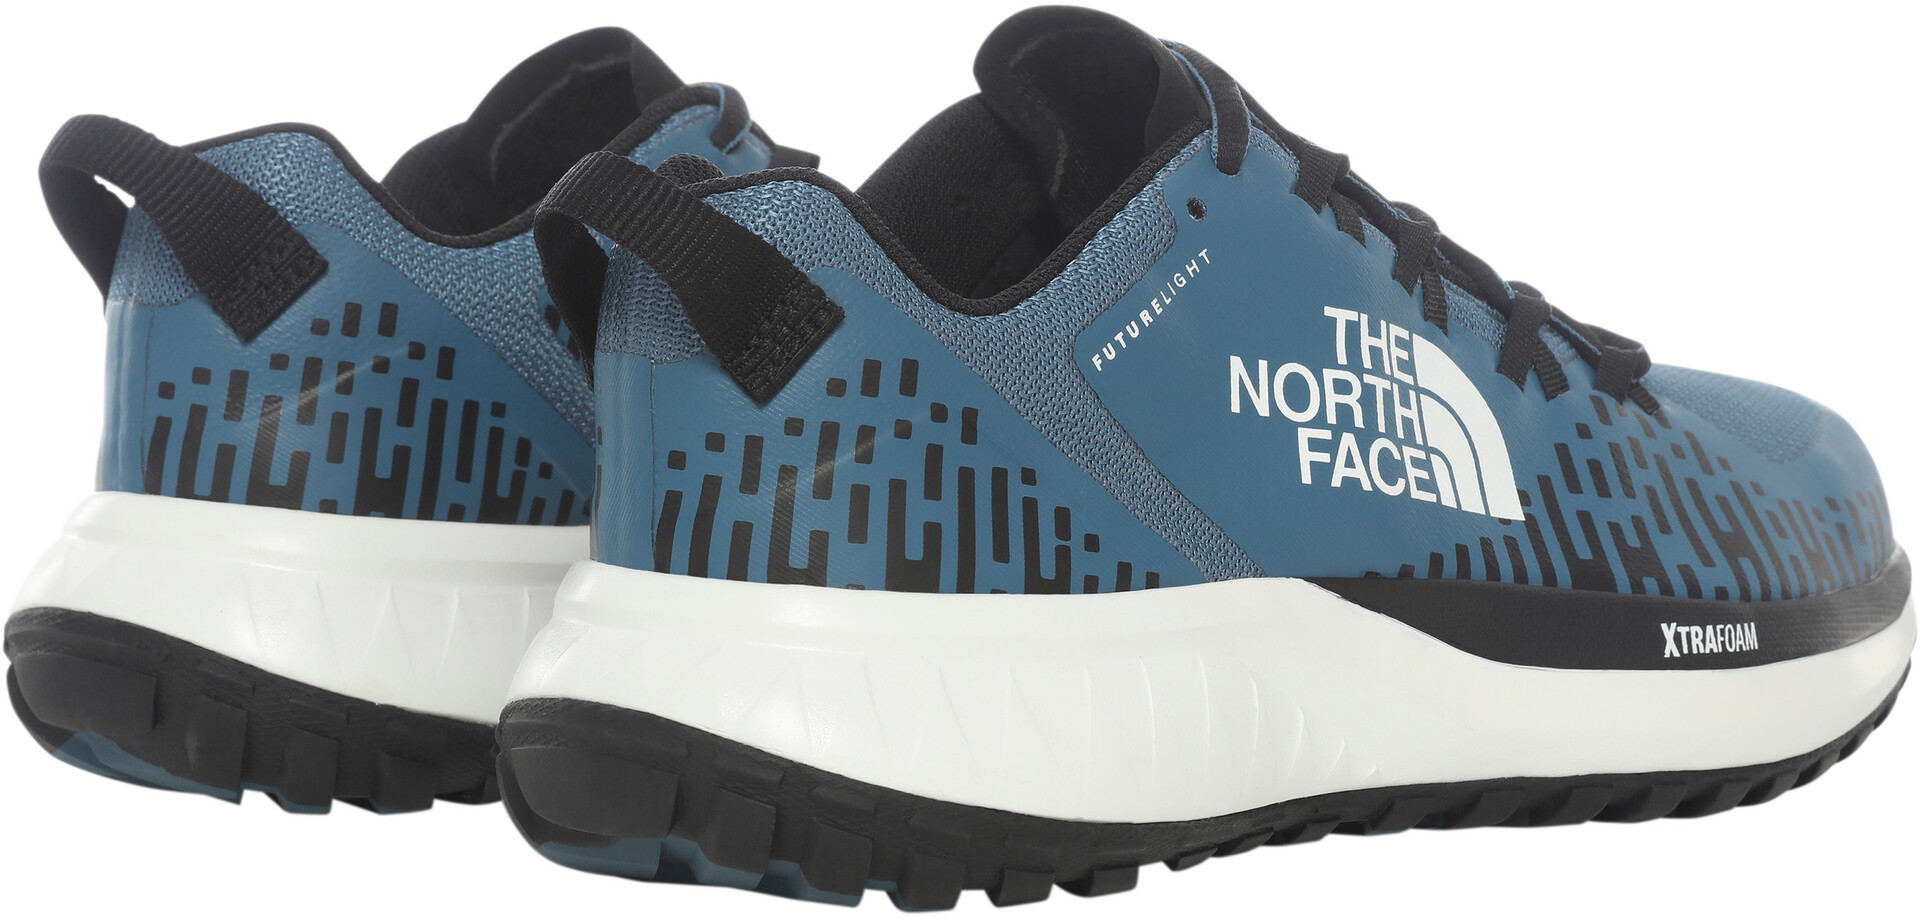 The North Face Ultra Endurance XF 